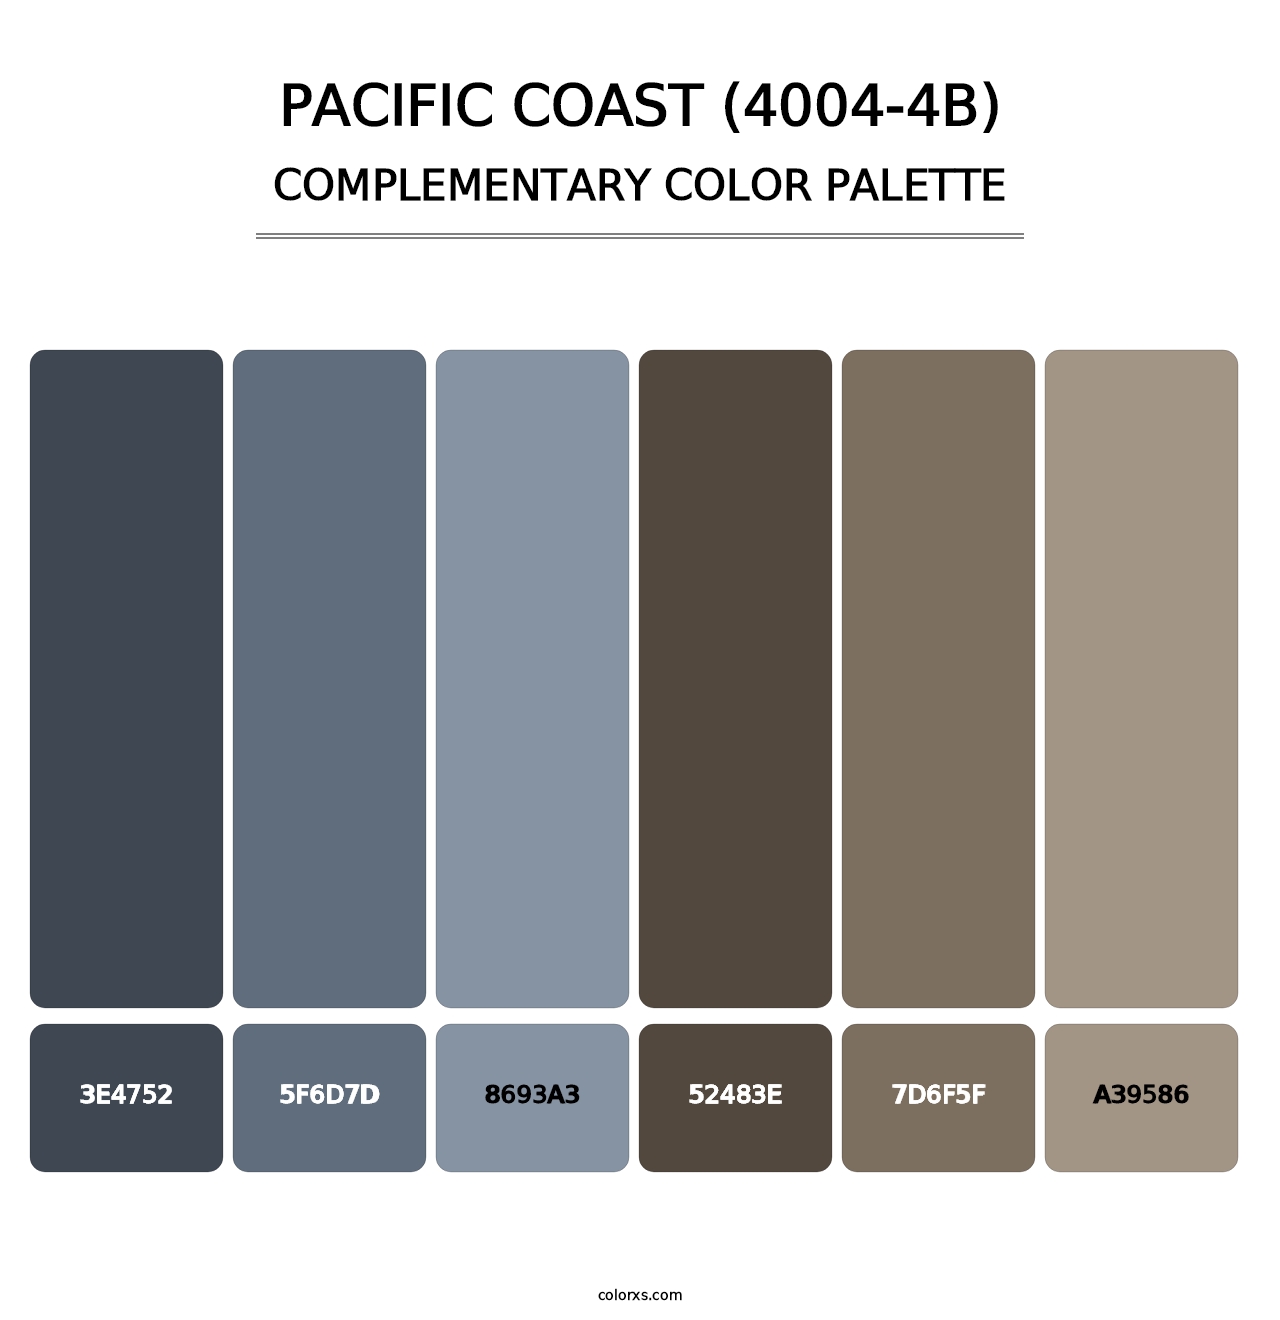 Pacific Coast (4004-4B) - Complementary Color Palette